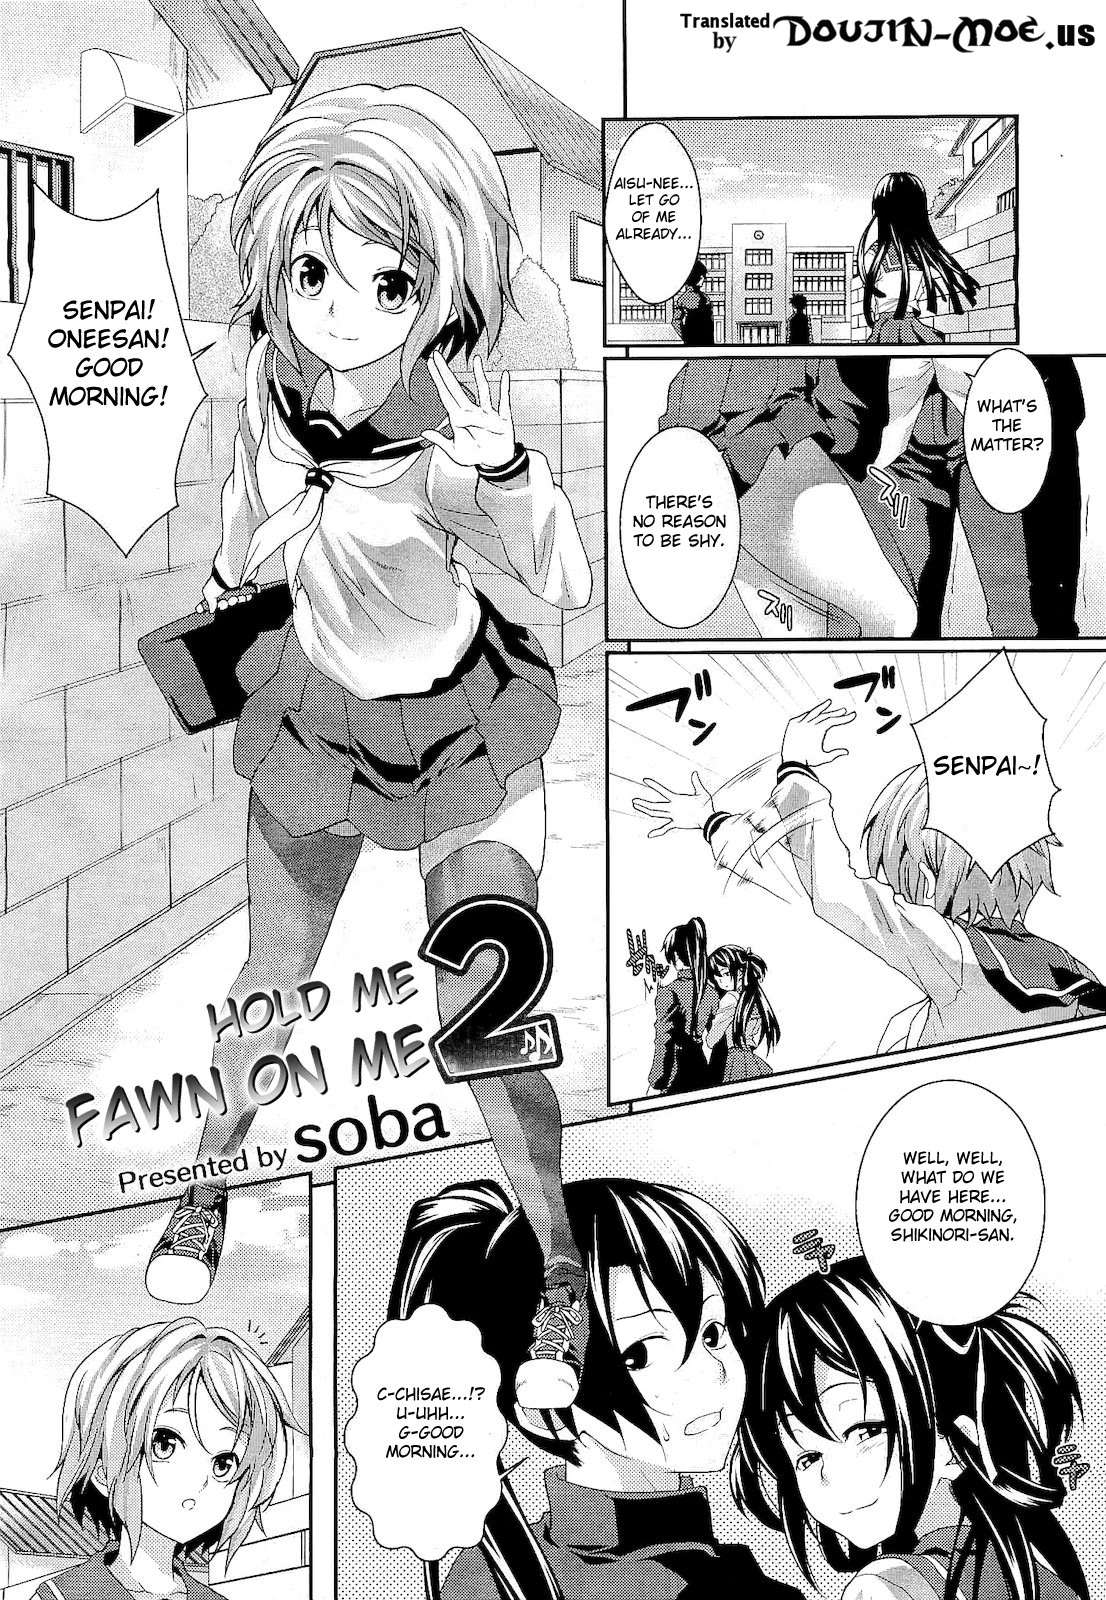 [soba] Tsukushite♪Amaete♪ | Hold Me, Fawn on Me Ch. 1-2 [English] {doujin-moe.us} page 25 full